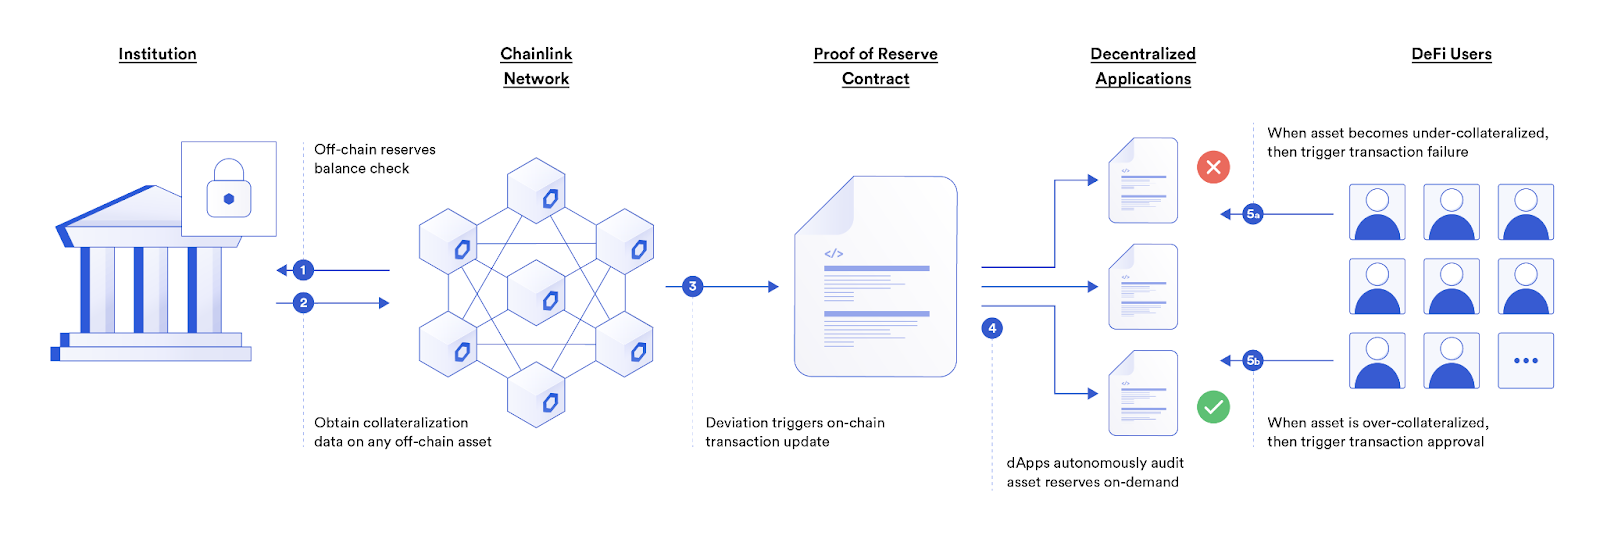 A diagram showing how Chainlink PoR helps secure wrapped tokens backed by off-chain reserves.